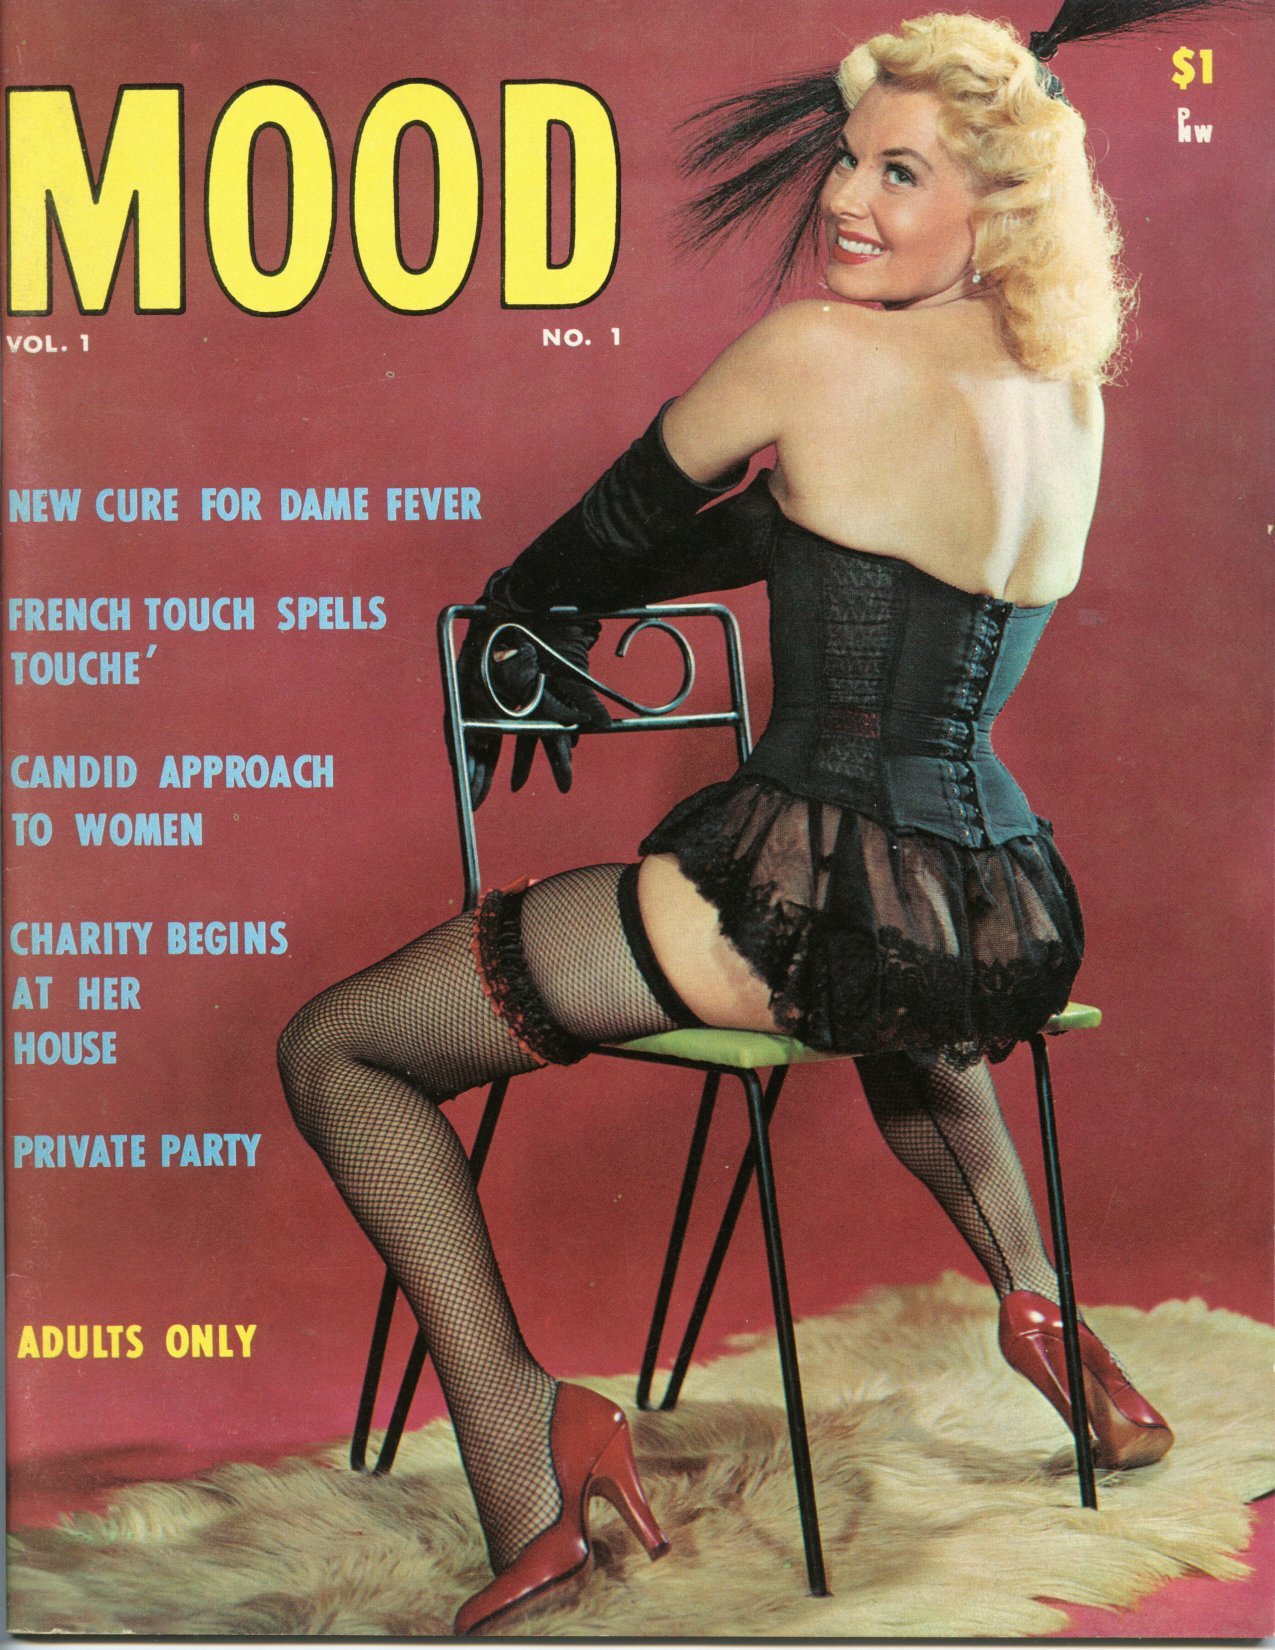 Syra Marty displays her lovely backside on the cover of the premier issue of &lsquo;MOOD&rsquo;